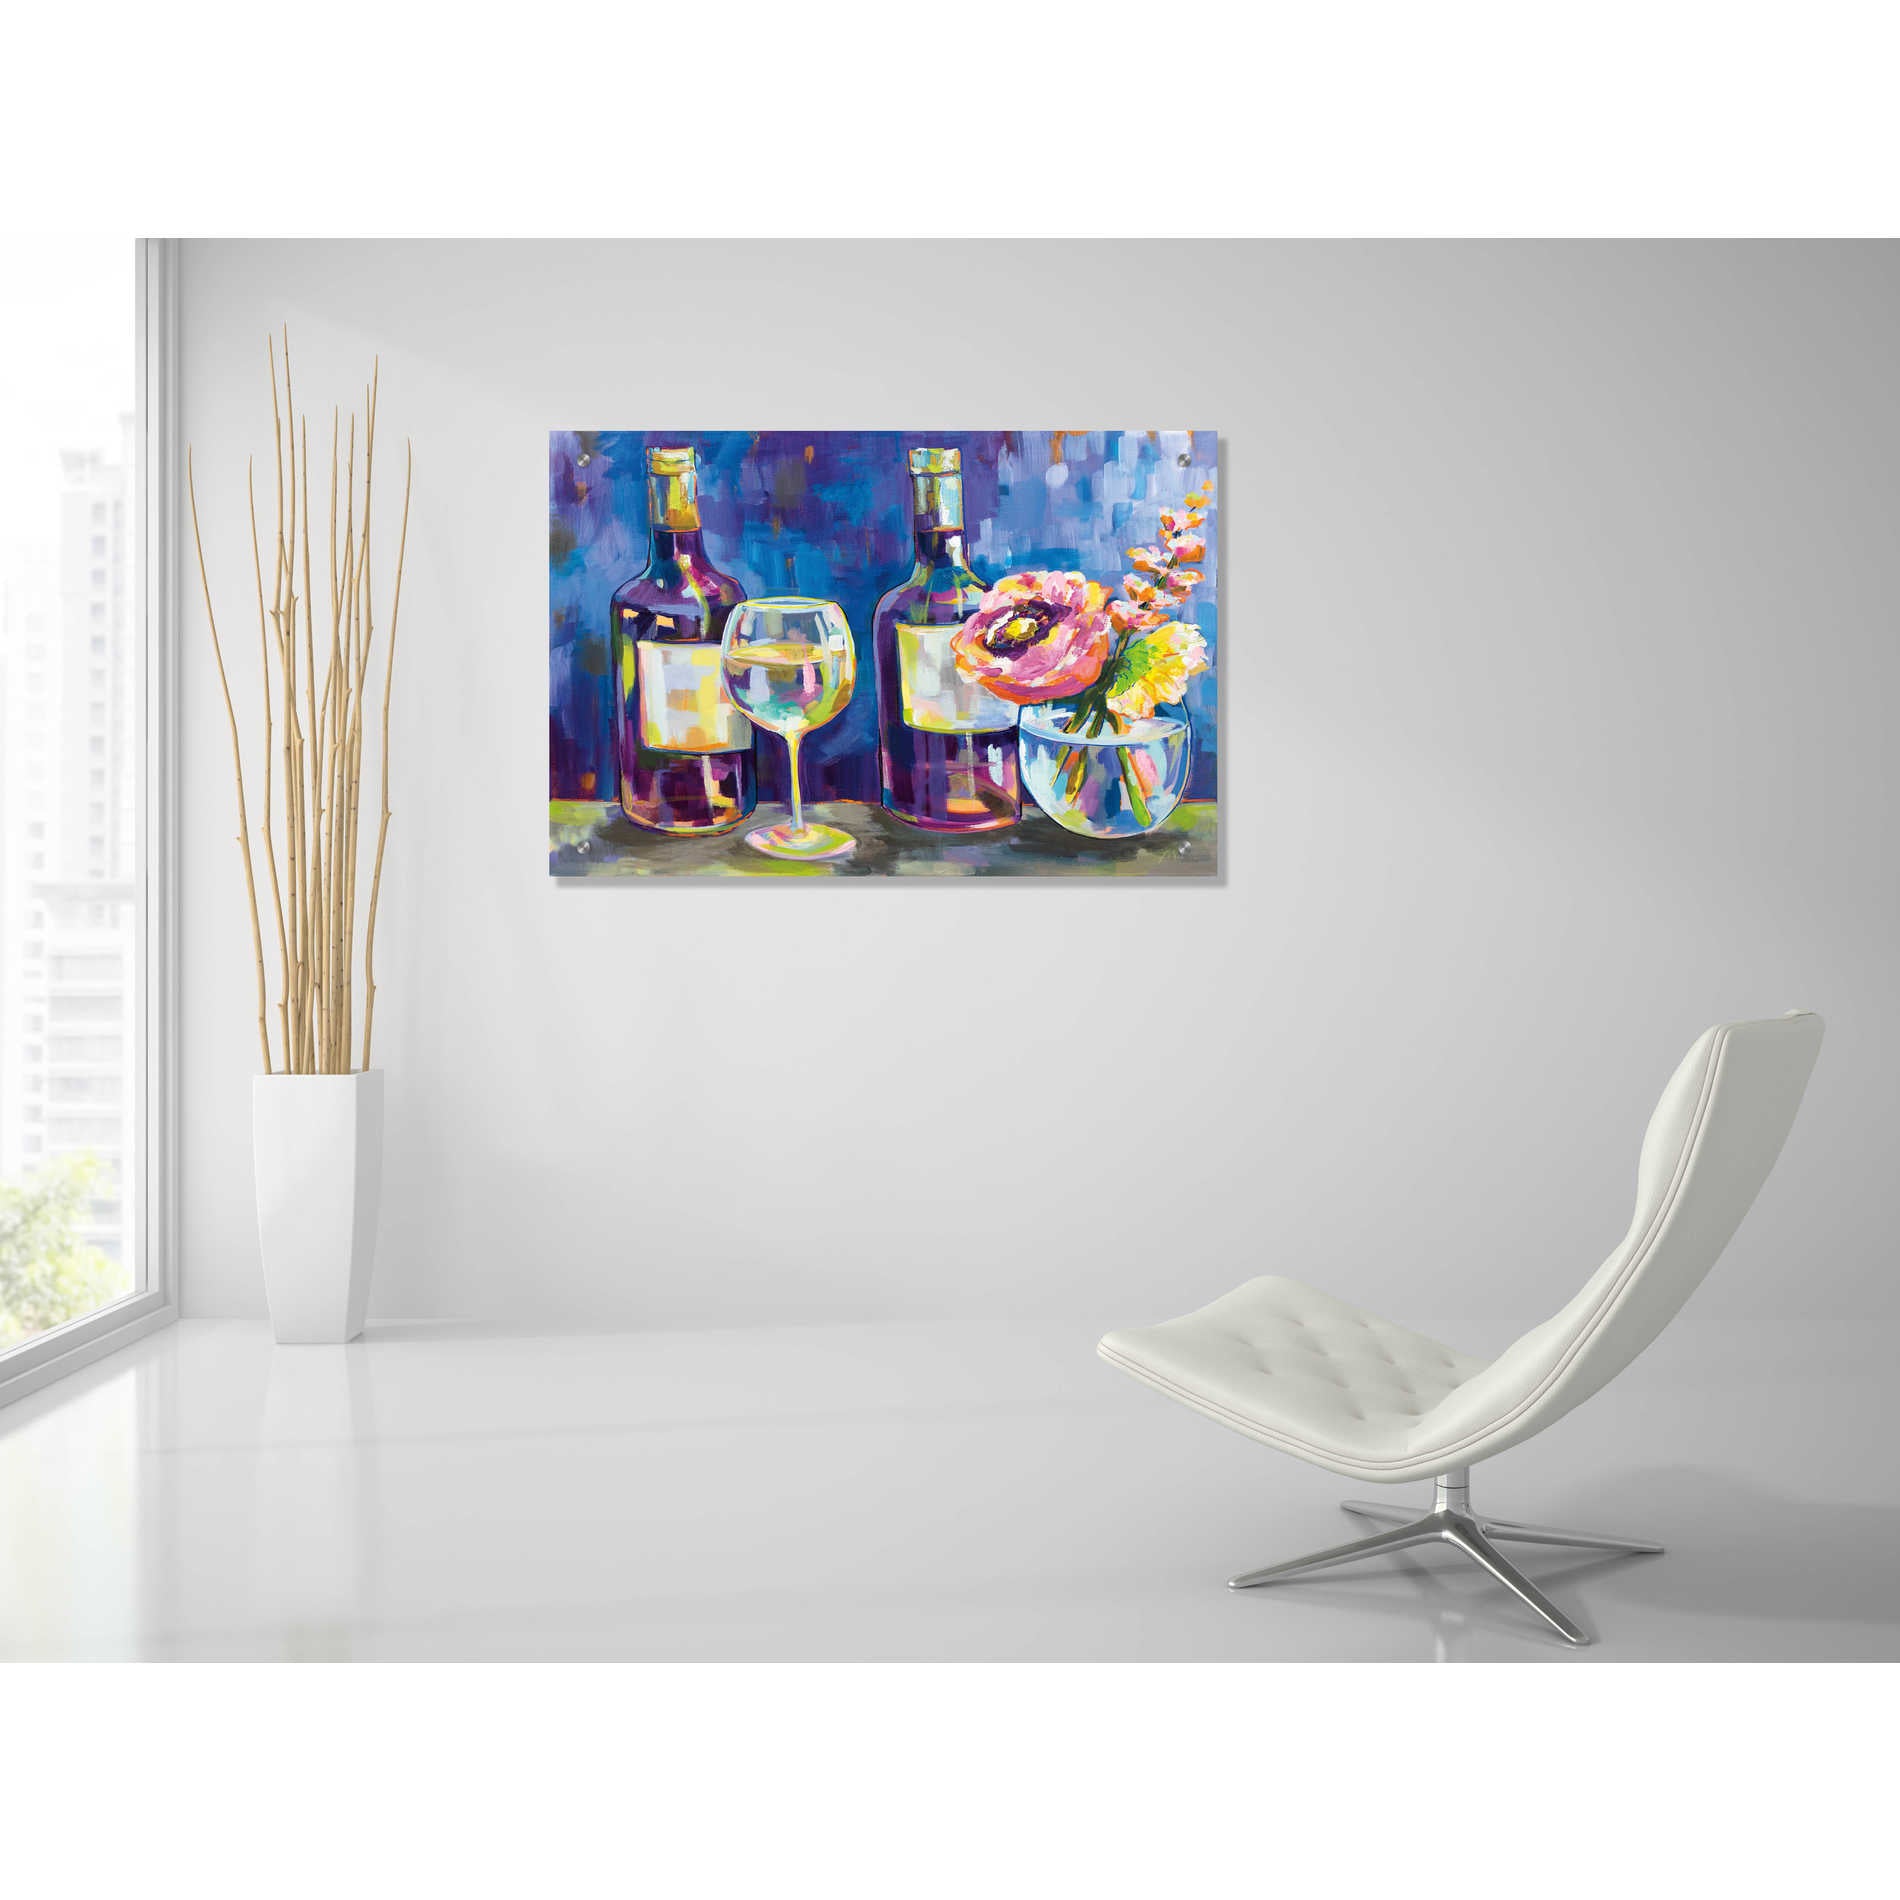 Epic Art 'Floral Party' by Jeanette Vertentes, Acrylic Glass Wall Art,36x24